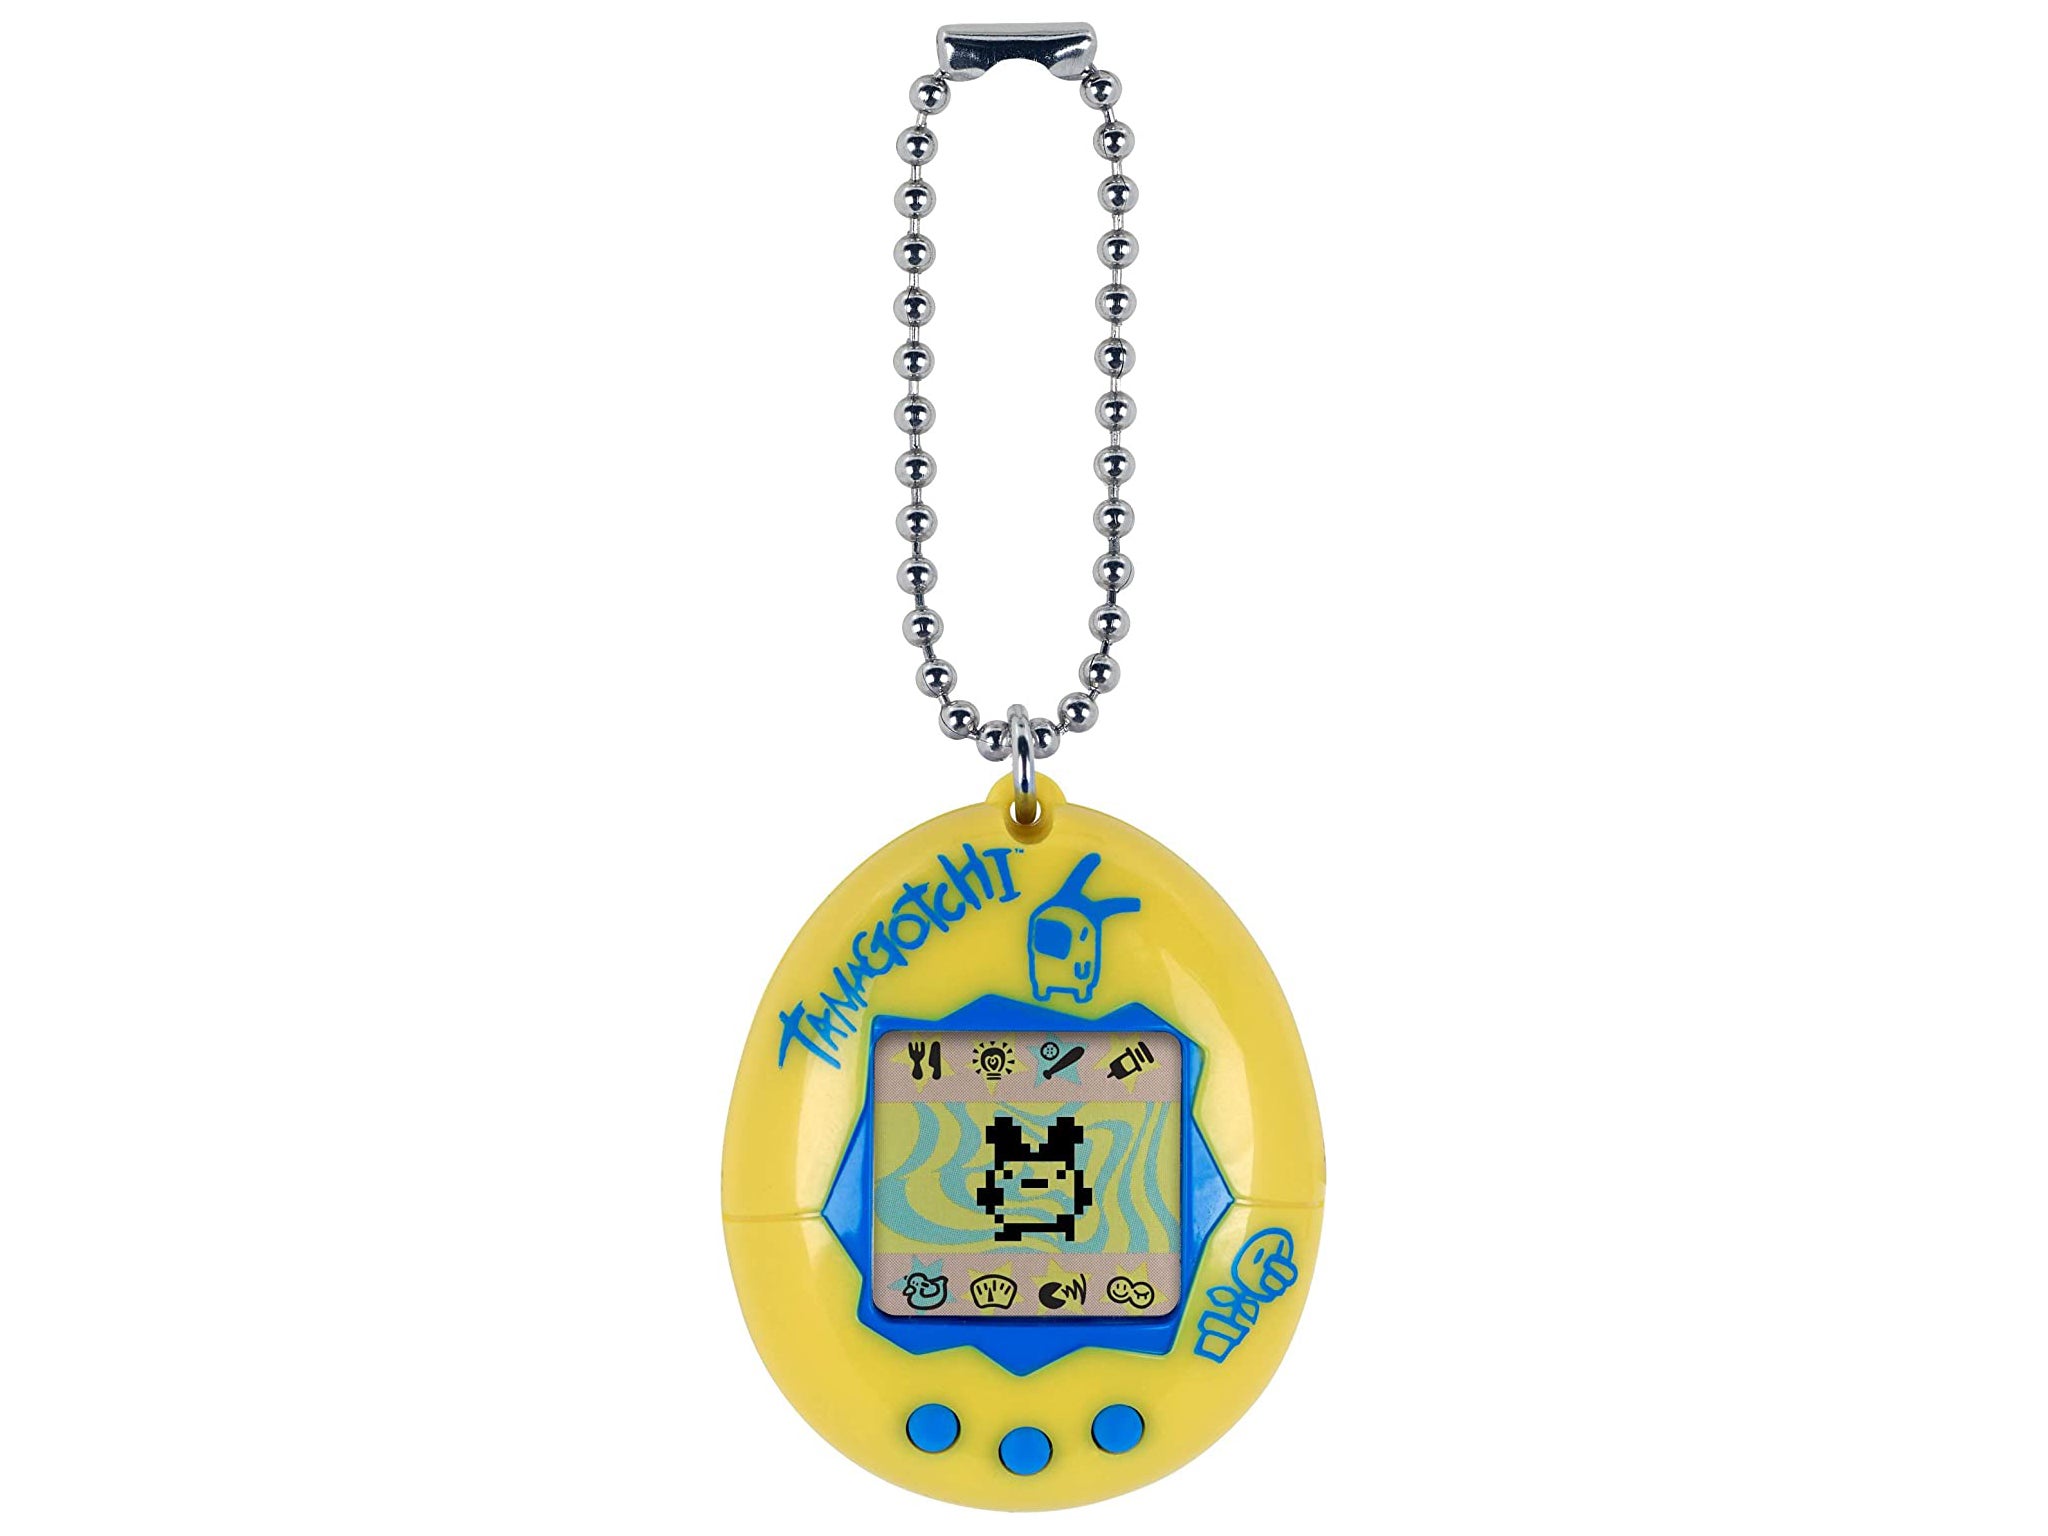 Whatever you do, look after this virtual pet if your kid’s not around…